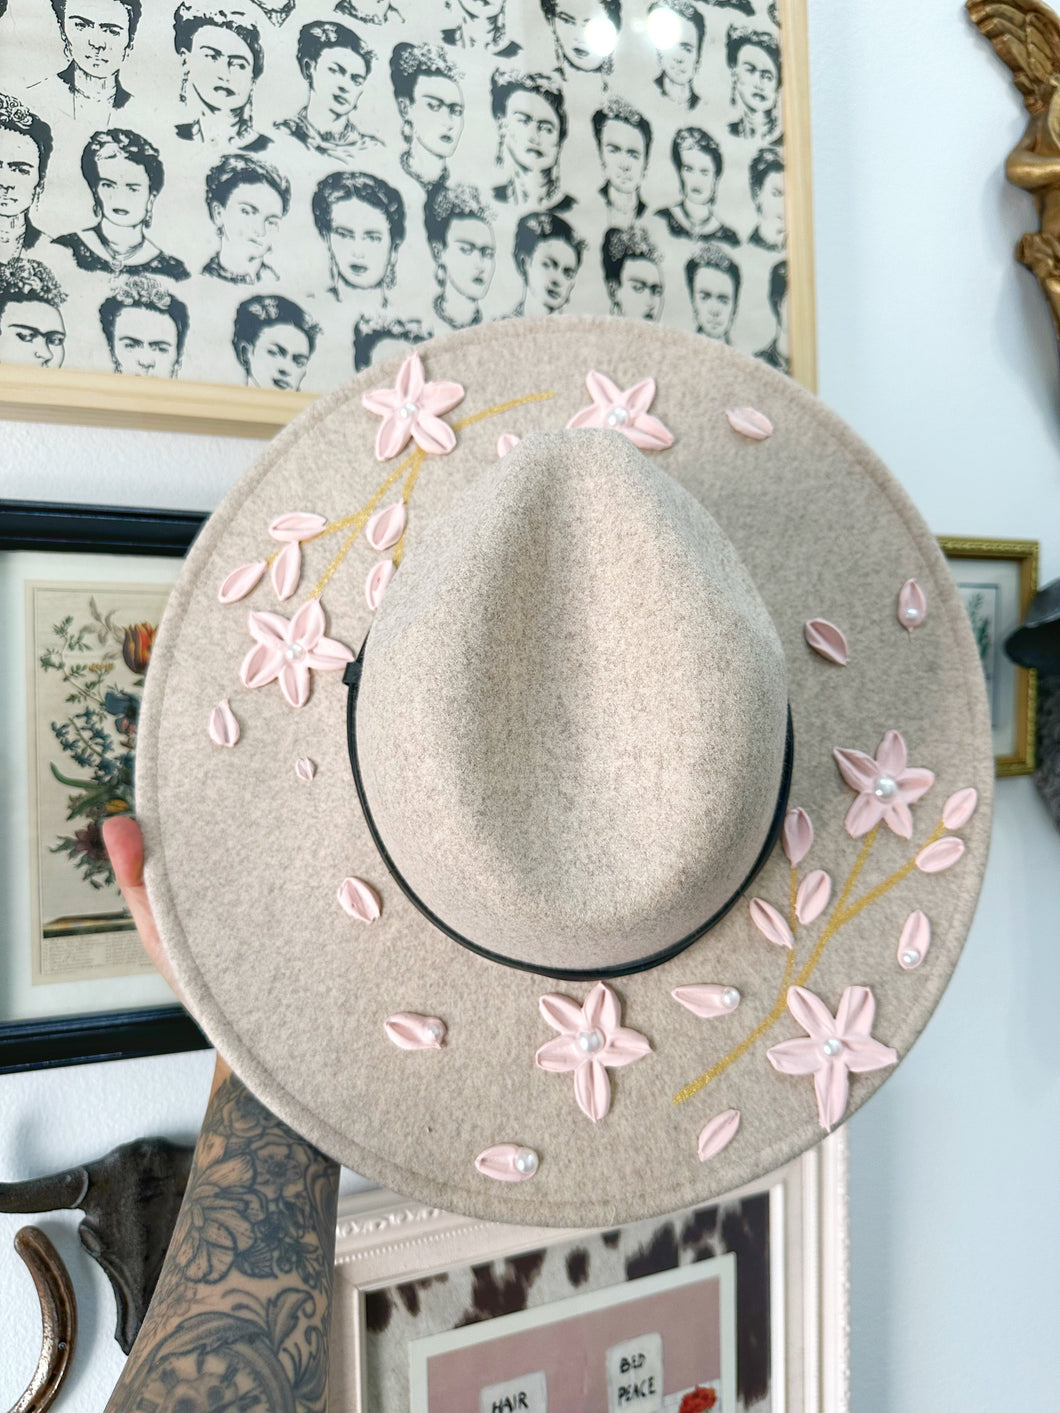 Oatmeal cherry blossom hat with pearls